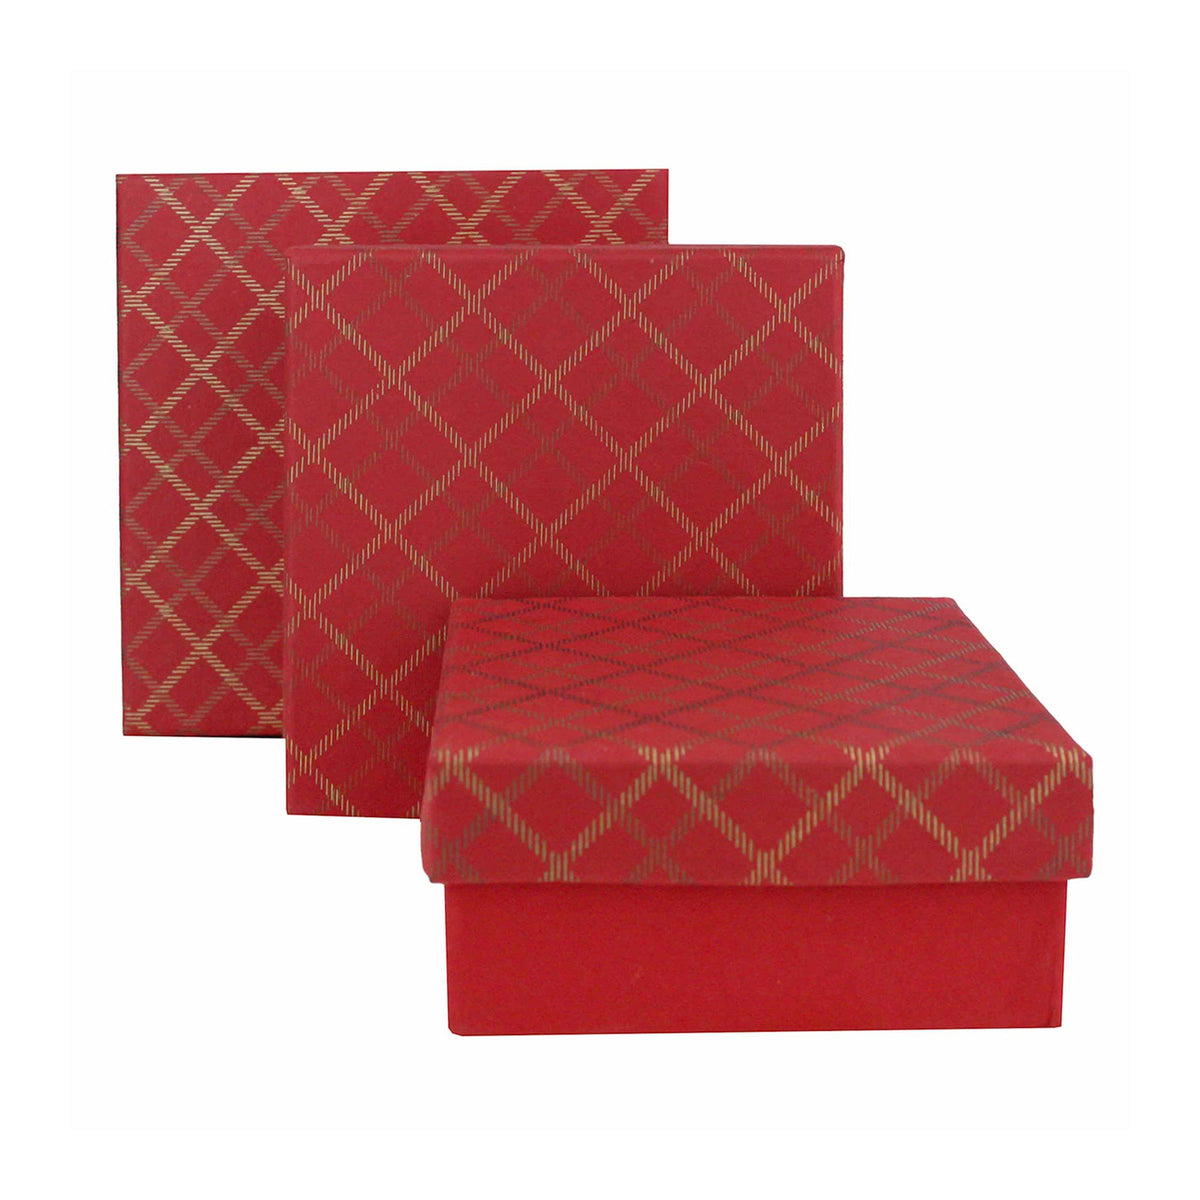 Handcrafted Chequered Red Gift Boxes - Set of 3 (Sizes Available)